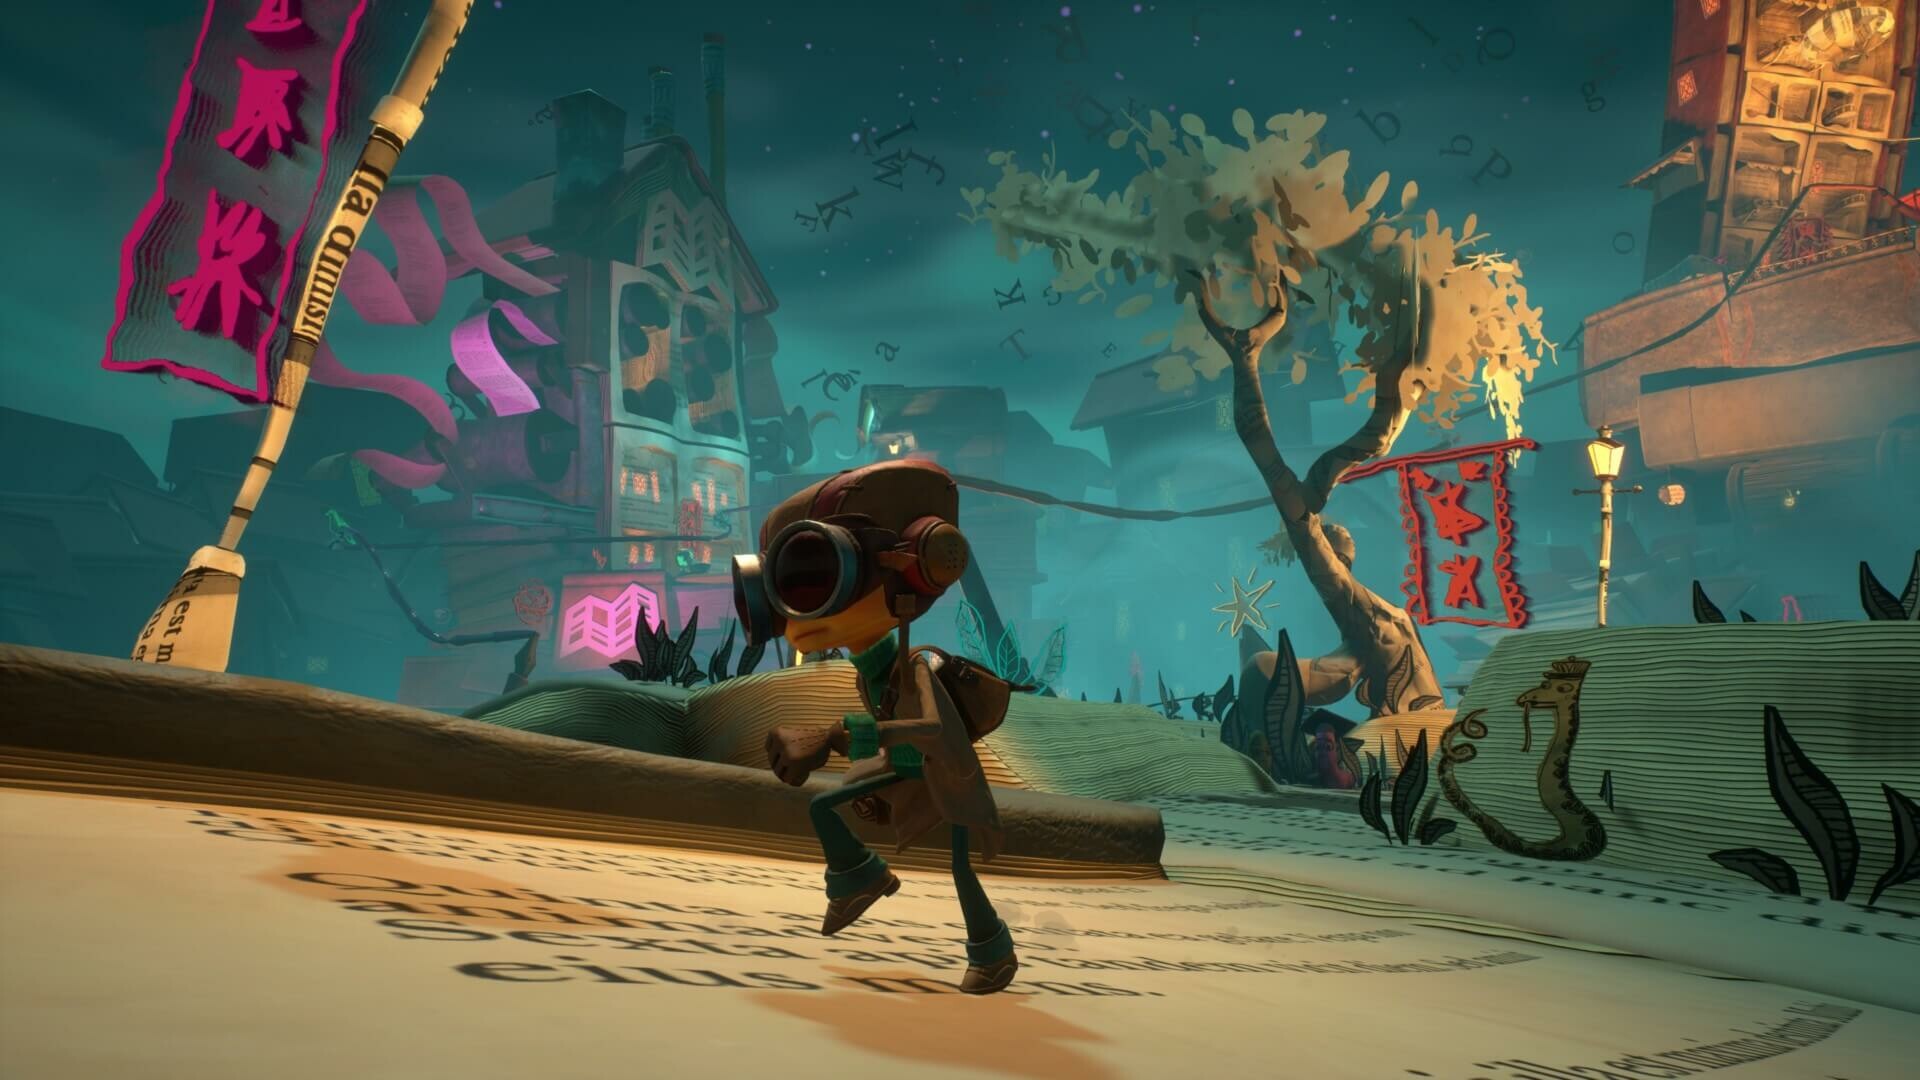 Psychonauts 2: The player-character Razputin of a platform game developed by Double Fine. 1920x1080 Full HD Background.